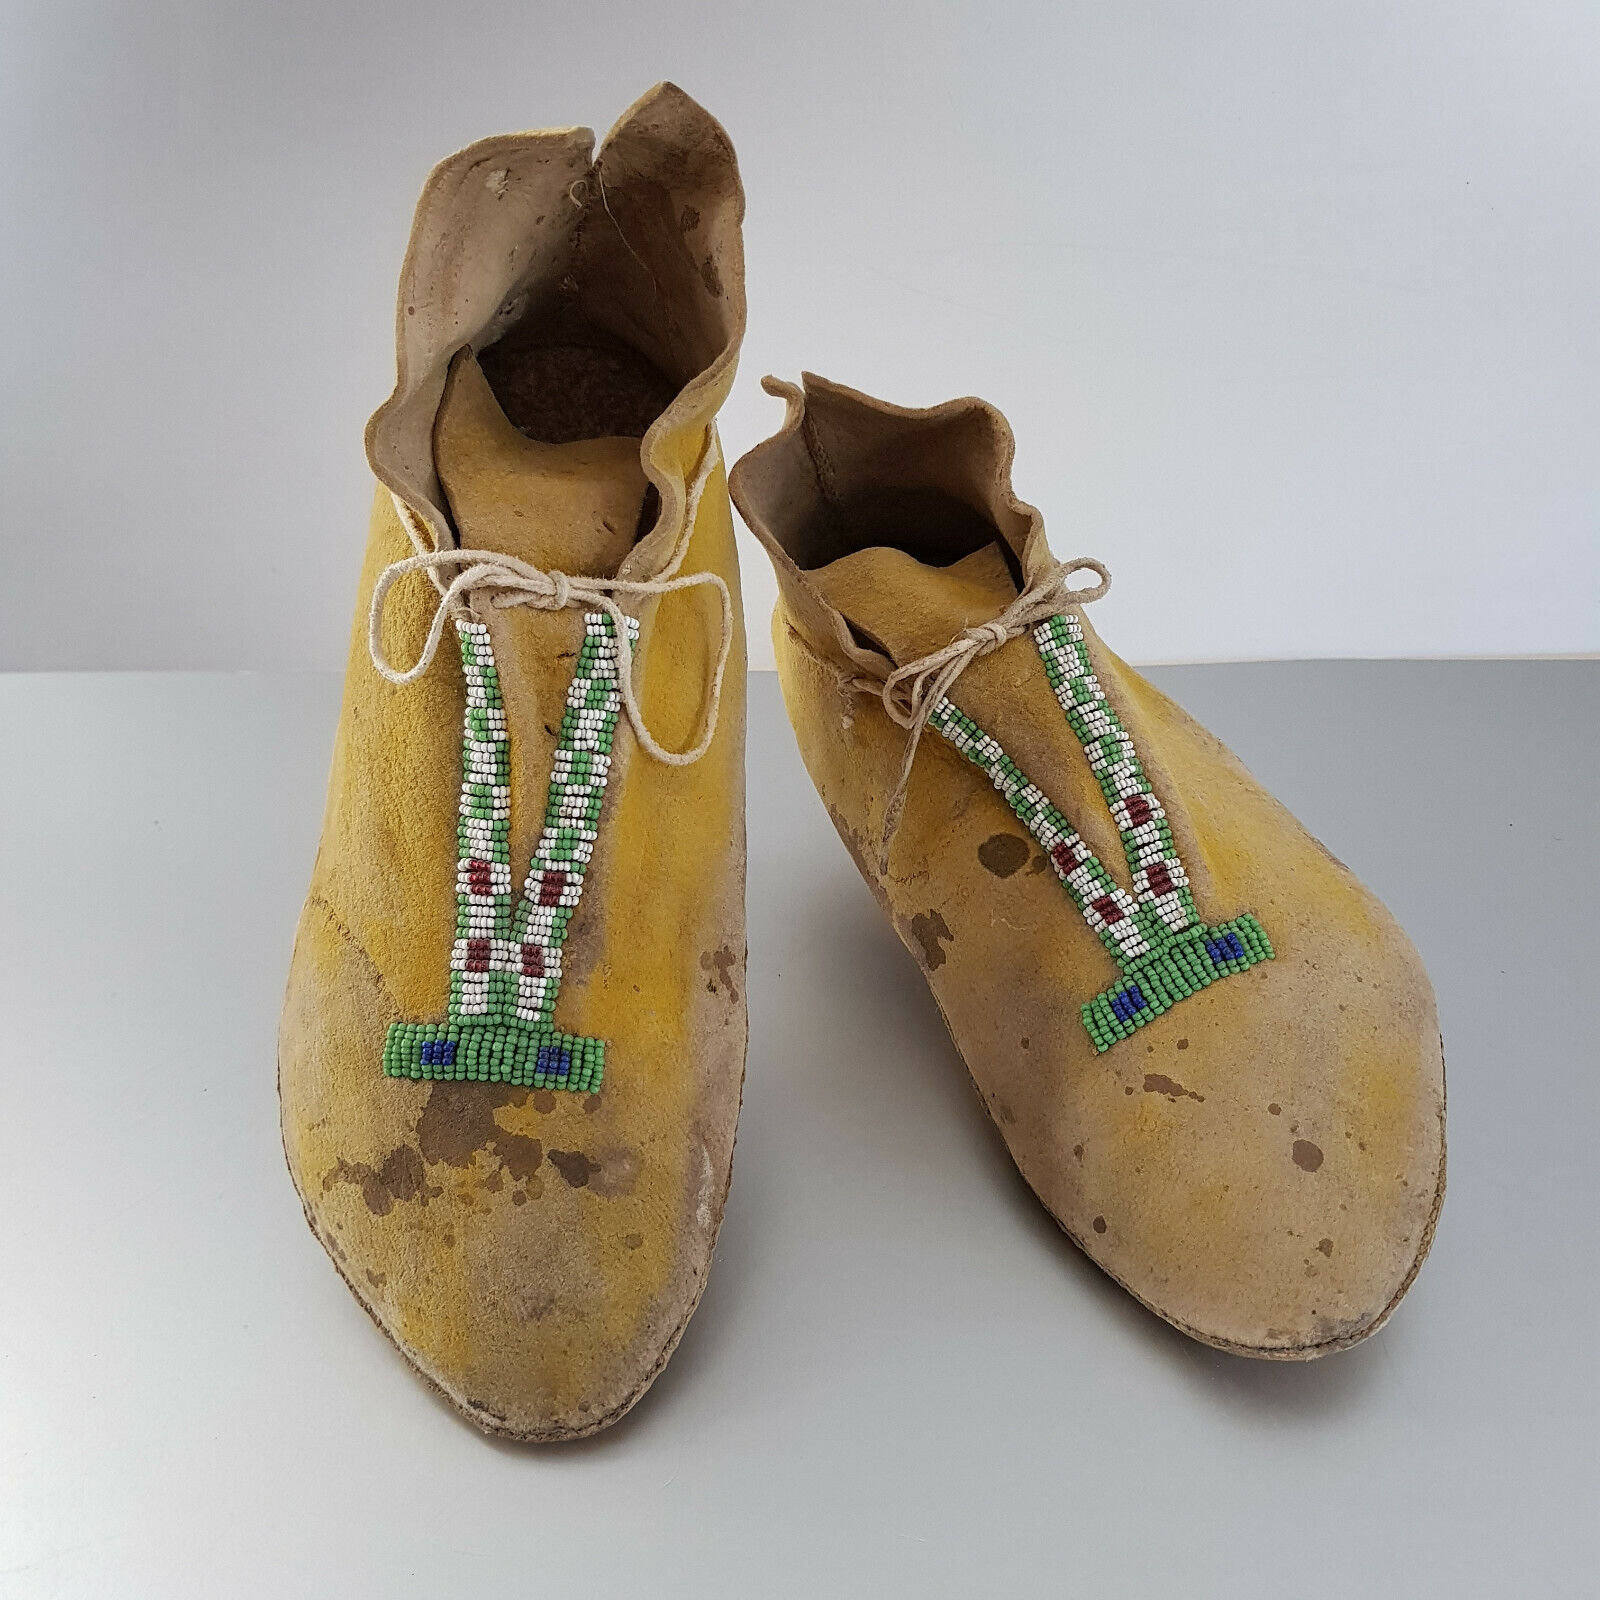 Antique Southern Plains (Apache) Beaded Moccasins, ca. 1880s-1890s. Published.